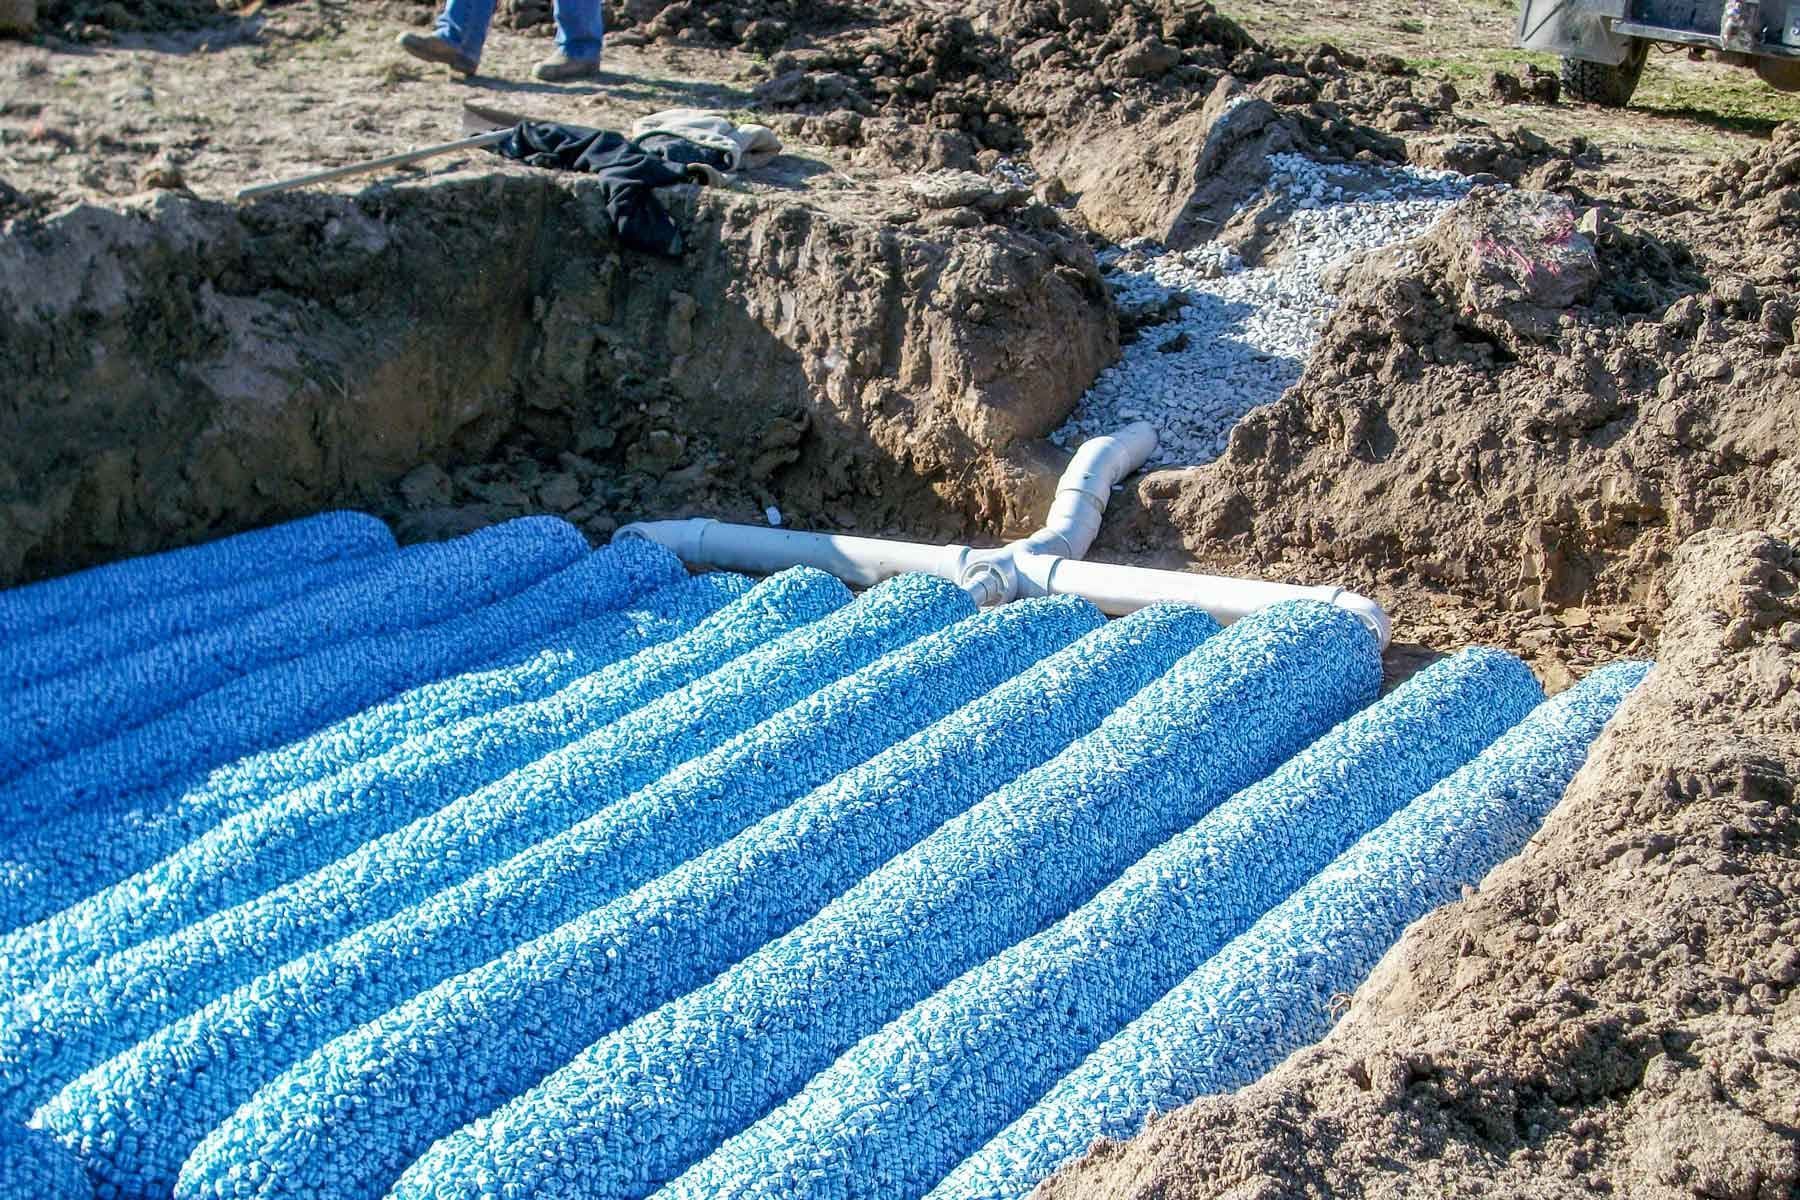 Drainfield repair with blue popcorn lines in Tuscaloosa, Alabama.